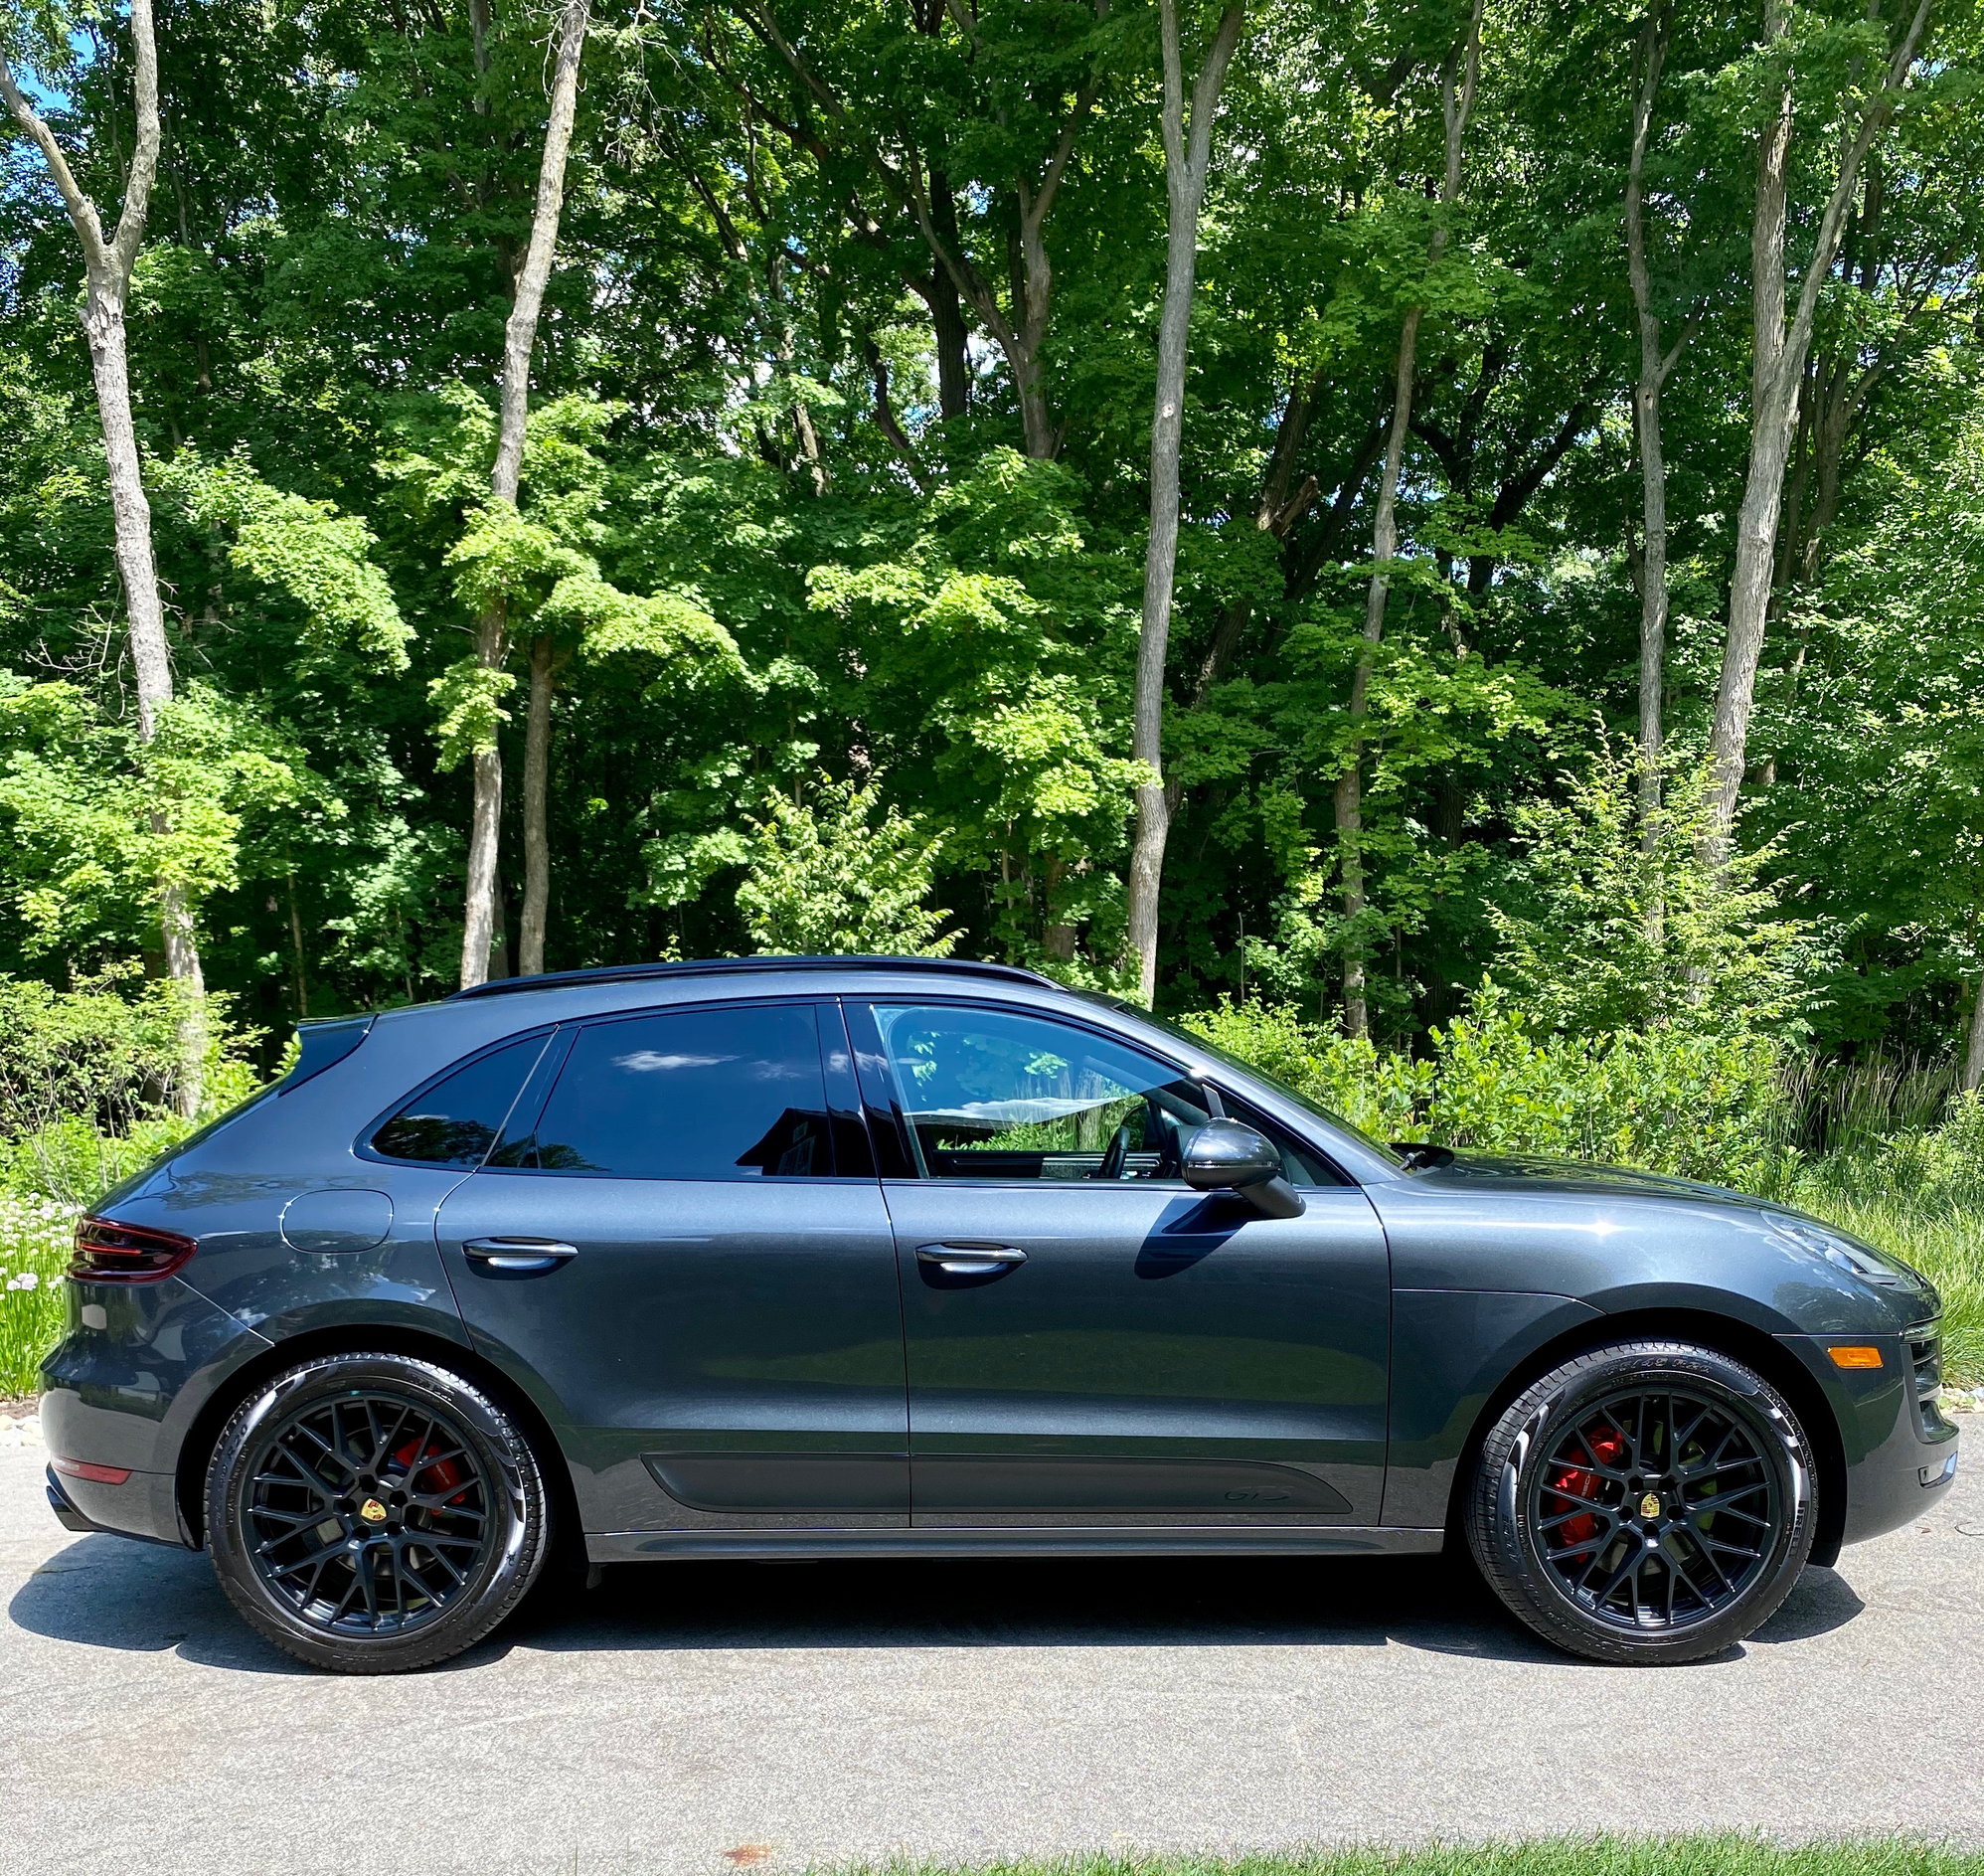 2017 Porsche Macan - 2017 Porsche Macan GTS Volcano Grey - Prestine - Used - VIN WP1AG2A51HLB54604 - 43,000 Miles - 6 cyl - AWD - Manual - SUV - Gray - Chicago, IL 60010, United States